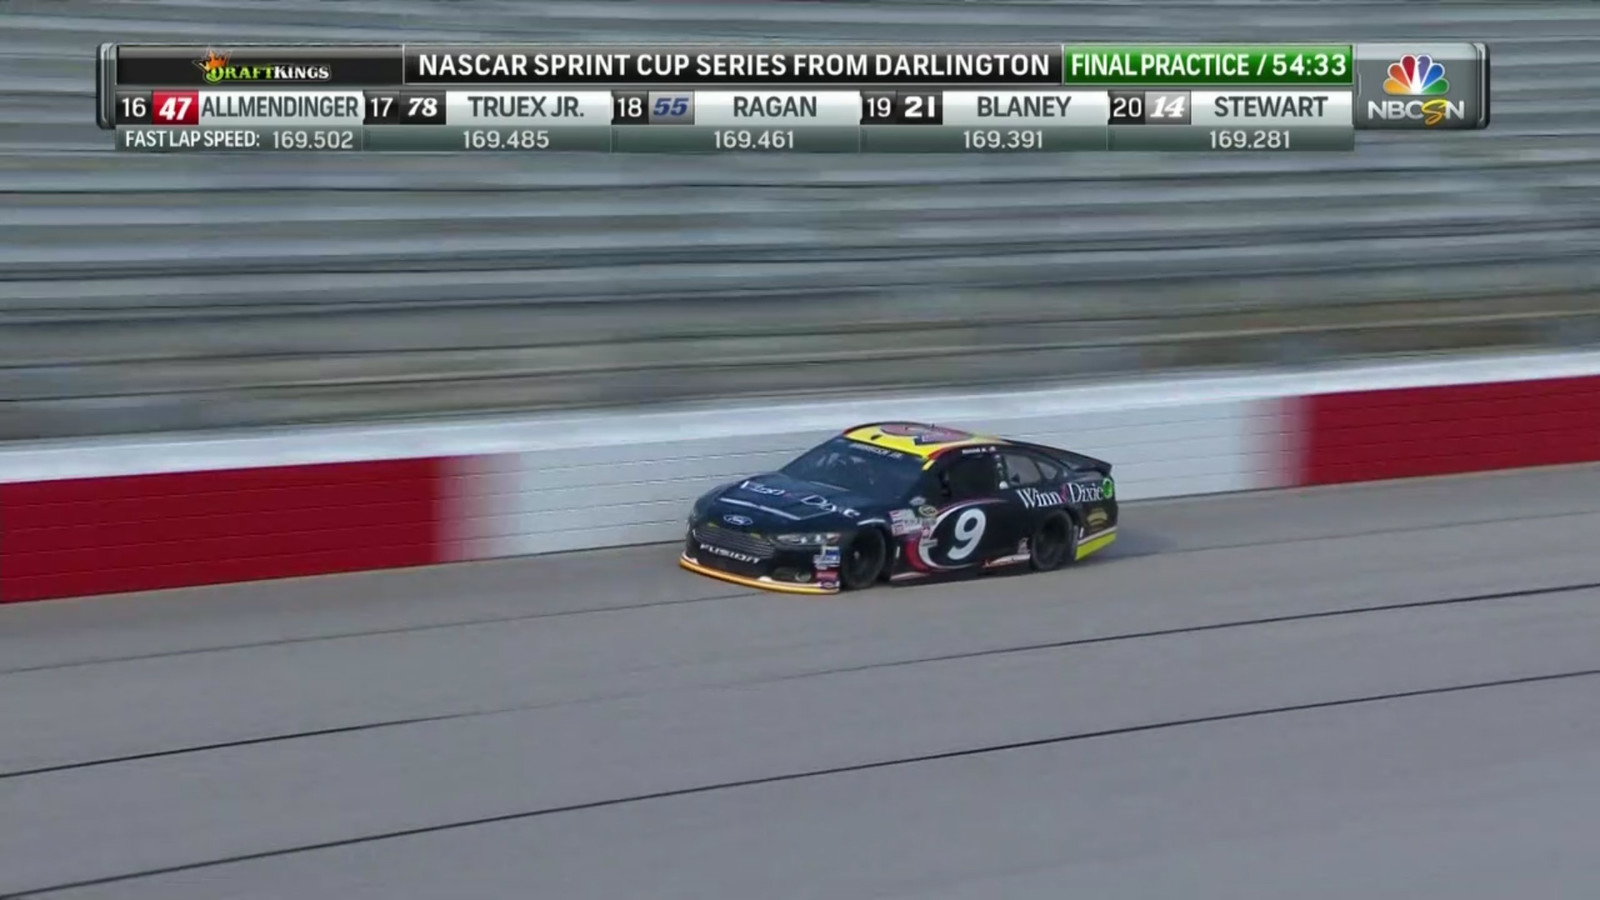 Hornish in the #9 Winn-Dixie Ford Fusion at Darlington Raceway. Screen capture from NBC's live broadcast of the Bojangles Southern 500 on September 6th, 2015. (Credit: NBC Sports)